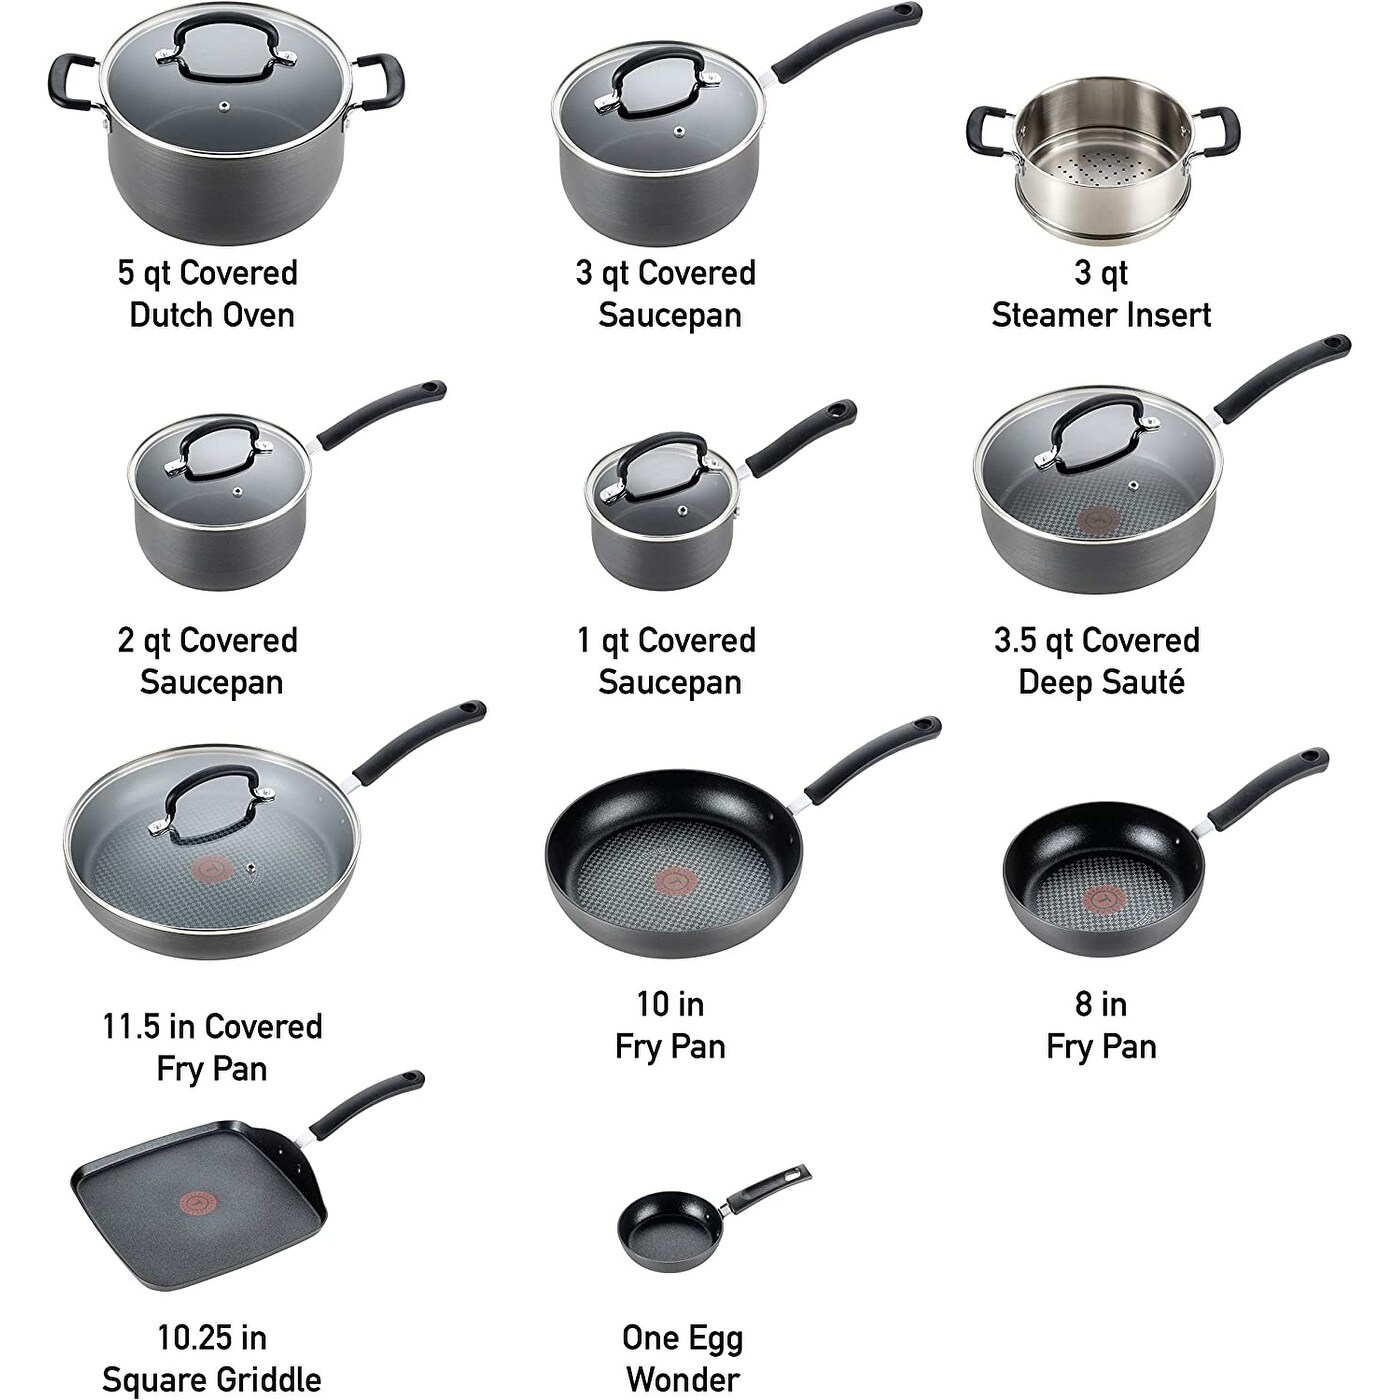 https://ak1.ostkcdn.com/images/products/is/images/direct/e56fc6618dfcb51f7cd7fb0a67152846f2d82437/T-fal-Ultimate-Hard-Anodized-Nonstick-Cookware-Set-14-Piece-Pots-and-Pans%2C-Dishwasher-Safe-Black.jpg